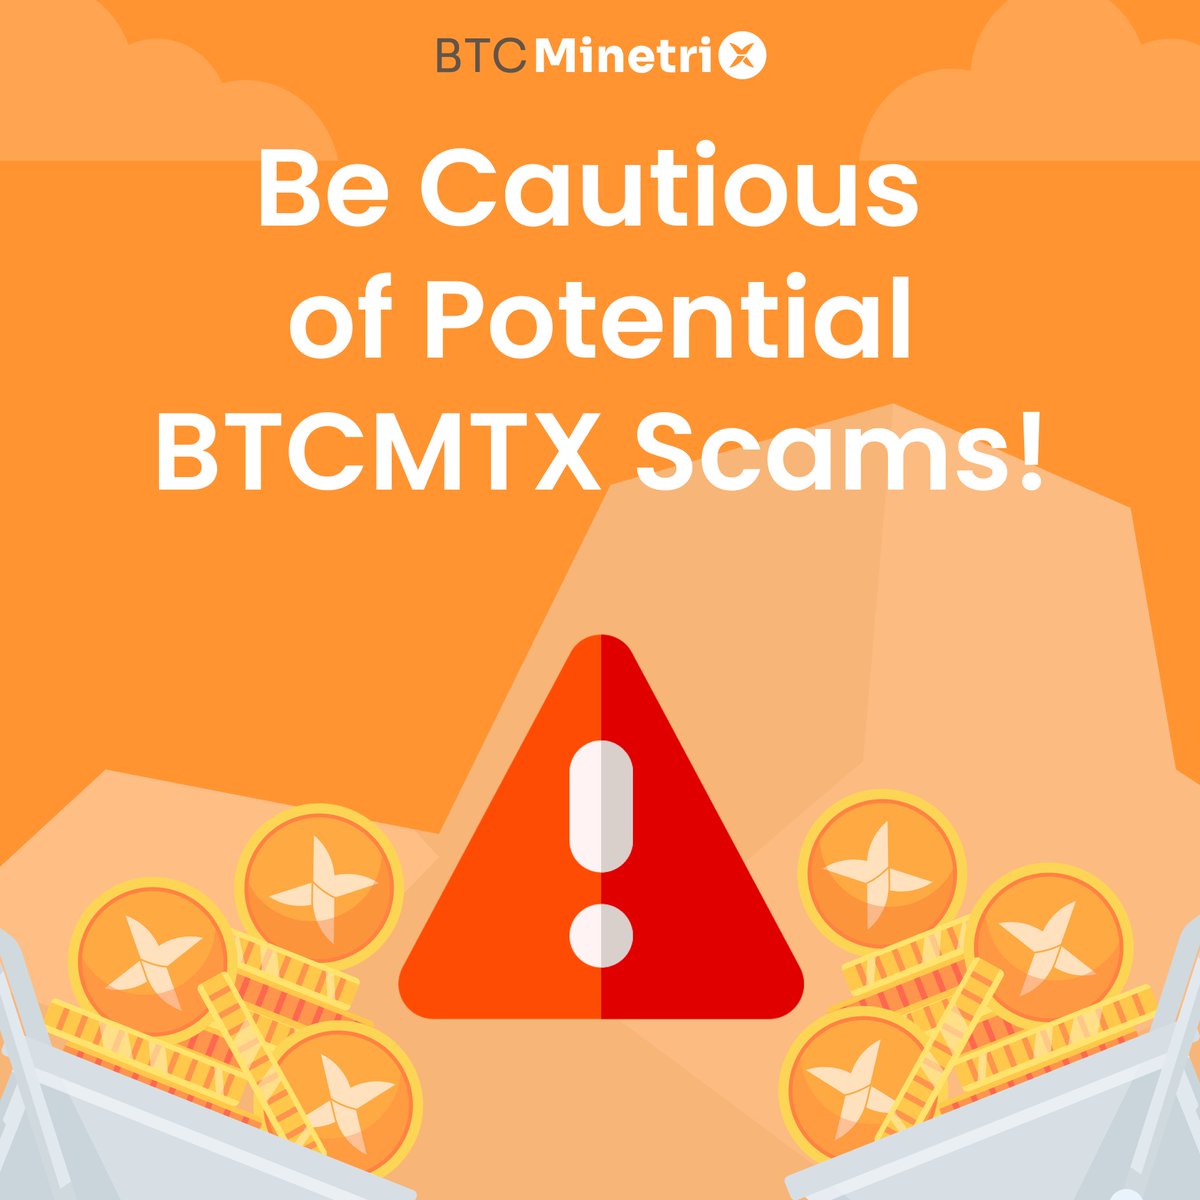 Remain cautious of potential #BTCMTX scams! ⚠️ Our team will never reach out to you first. Watch out for messages from accounts posing as 'Official', 'Support', 'Assistance', or 'Help'. 🚫 Avoid interacting with these accounts and block them right away.